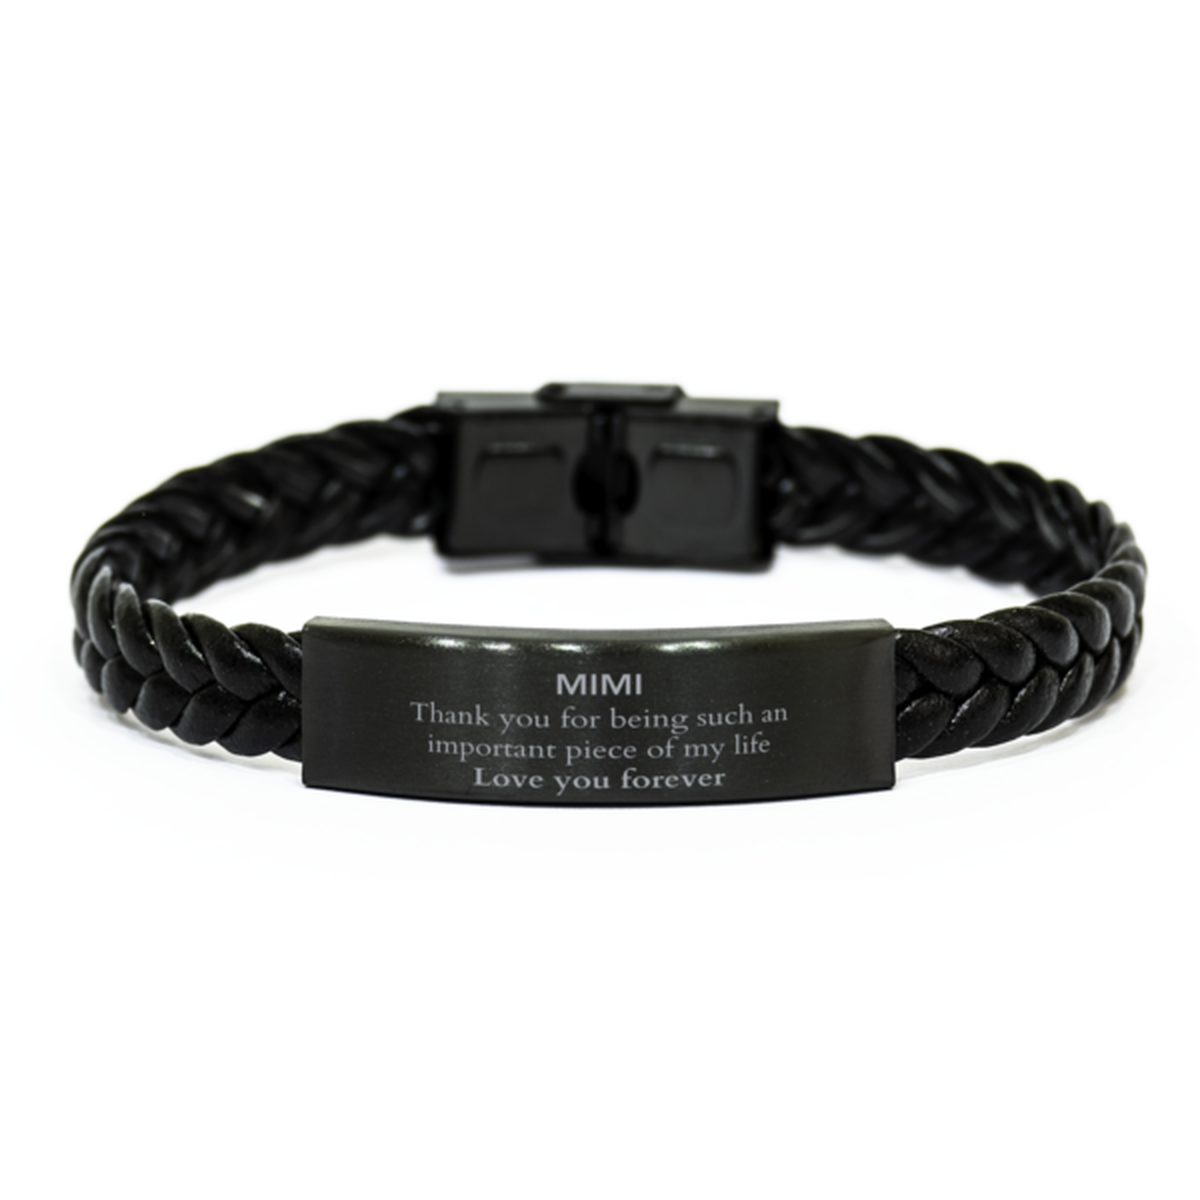 Appropriate Mimi Braided Leather Bracelet Epic Birthday Gifts for Mimi Thank you for being such an important piece of my life Mimi Christmas Mothers Fathers Day